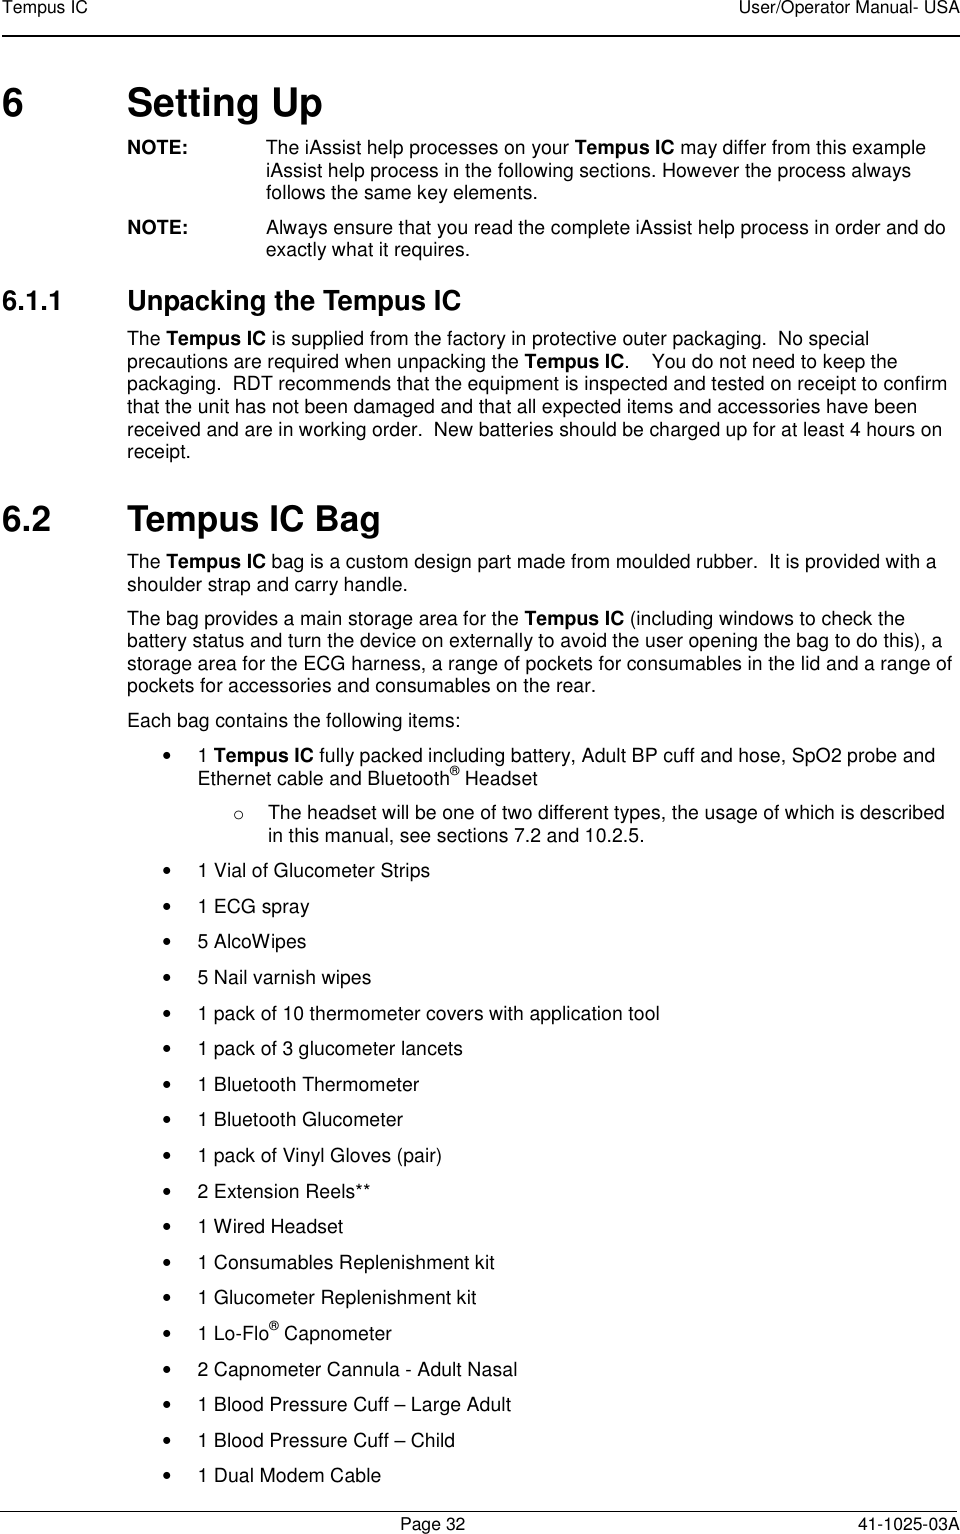 Tempus IC    User/Operator Manual- USA        Page 32  41-1025-03A 6  Setting Up  NOTE:  The iAssist help processes on your Tempus IC may differ from this example iAssist help process in the following sections. However the process always follows the same key elements.   NOTE:  Always ensure that you read the complete iAssist help process in order and do exactly what it requires.  6.1.1  Unpacking the Tempus IC The Tempus IC is supplied from the factory in protective outer packaging.  No special precautions are required when unpacking the Tempus IC.    You do not need to keep the packaging.  RDT recommends that the equipment is inspected and tested on receipt to confirm that the unit has not been damaged and that all expected items and accessories have been received and are in working order.  New batteries should be charged up for at least 4 hours on receipt.  6.2  Tempus IC Bag The Tempus IC bag is a custom design part made from moulded rubber.  It is provided with a shoulder strap and carry handle. The bag provides a main storage area for the Tempus IC (including windows to check the battery status and turn the device on externally to avoid the user opening the bag to do this), a storage area for the ECG harness, a range of pockets for consumables in the lid and a range of pockets for accessories and consumables on the rear. Each bag contains the following items: •  1 Tempus IC fully packed including battery, Adult BP cuff and hose, SpO2 probe and Ethernet cable and Bluetooth® Headset o  The headset will be one of two different types, the usage of which is described in this manual, see sections 7.2 and 10.2.5. •  1 Vial of Glucometer Strips •  1 ECG spray •  5 AlcoWipes •  5 Nail varnish wipes •  1 pack of 10 thermometer covers with application tool •  1 pack of 3 glucometer lancets •  1 Bluetooth Thermometer •  1 Bluetooth Glucometer •  1 pack of Vinyl Gloves (pair) •  2 Extension Reels** •  1 Wired Headset •  1 Consumables Replenishment kit •  1 Glucometer Replenishment kit •  1 Lo-Flo® Capnometer •  2 Capnometer Cannula - Adult Nasal •  1 Blood Pressure Cuff – Large Adult   •  1 Blood Pressure Cuff – Child  •  1 Dual Modem Cable  